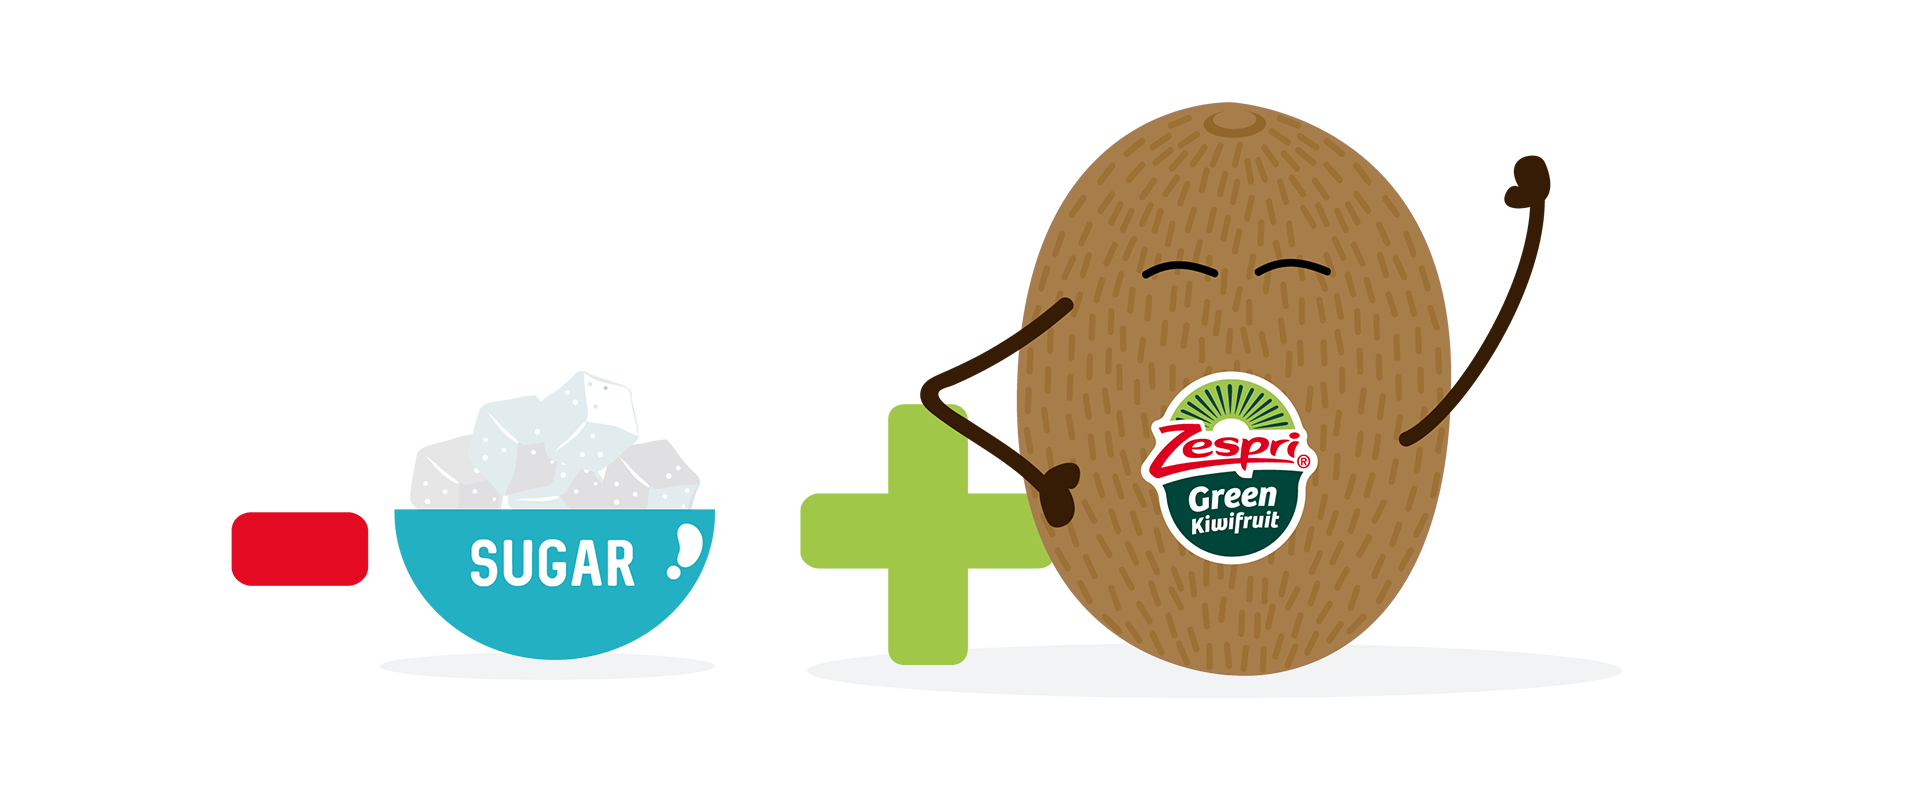 Is kiwifruit a smart choice when you’re looking to cut down on sugar?